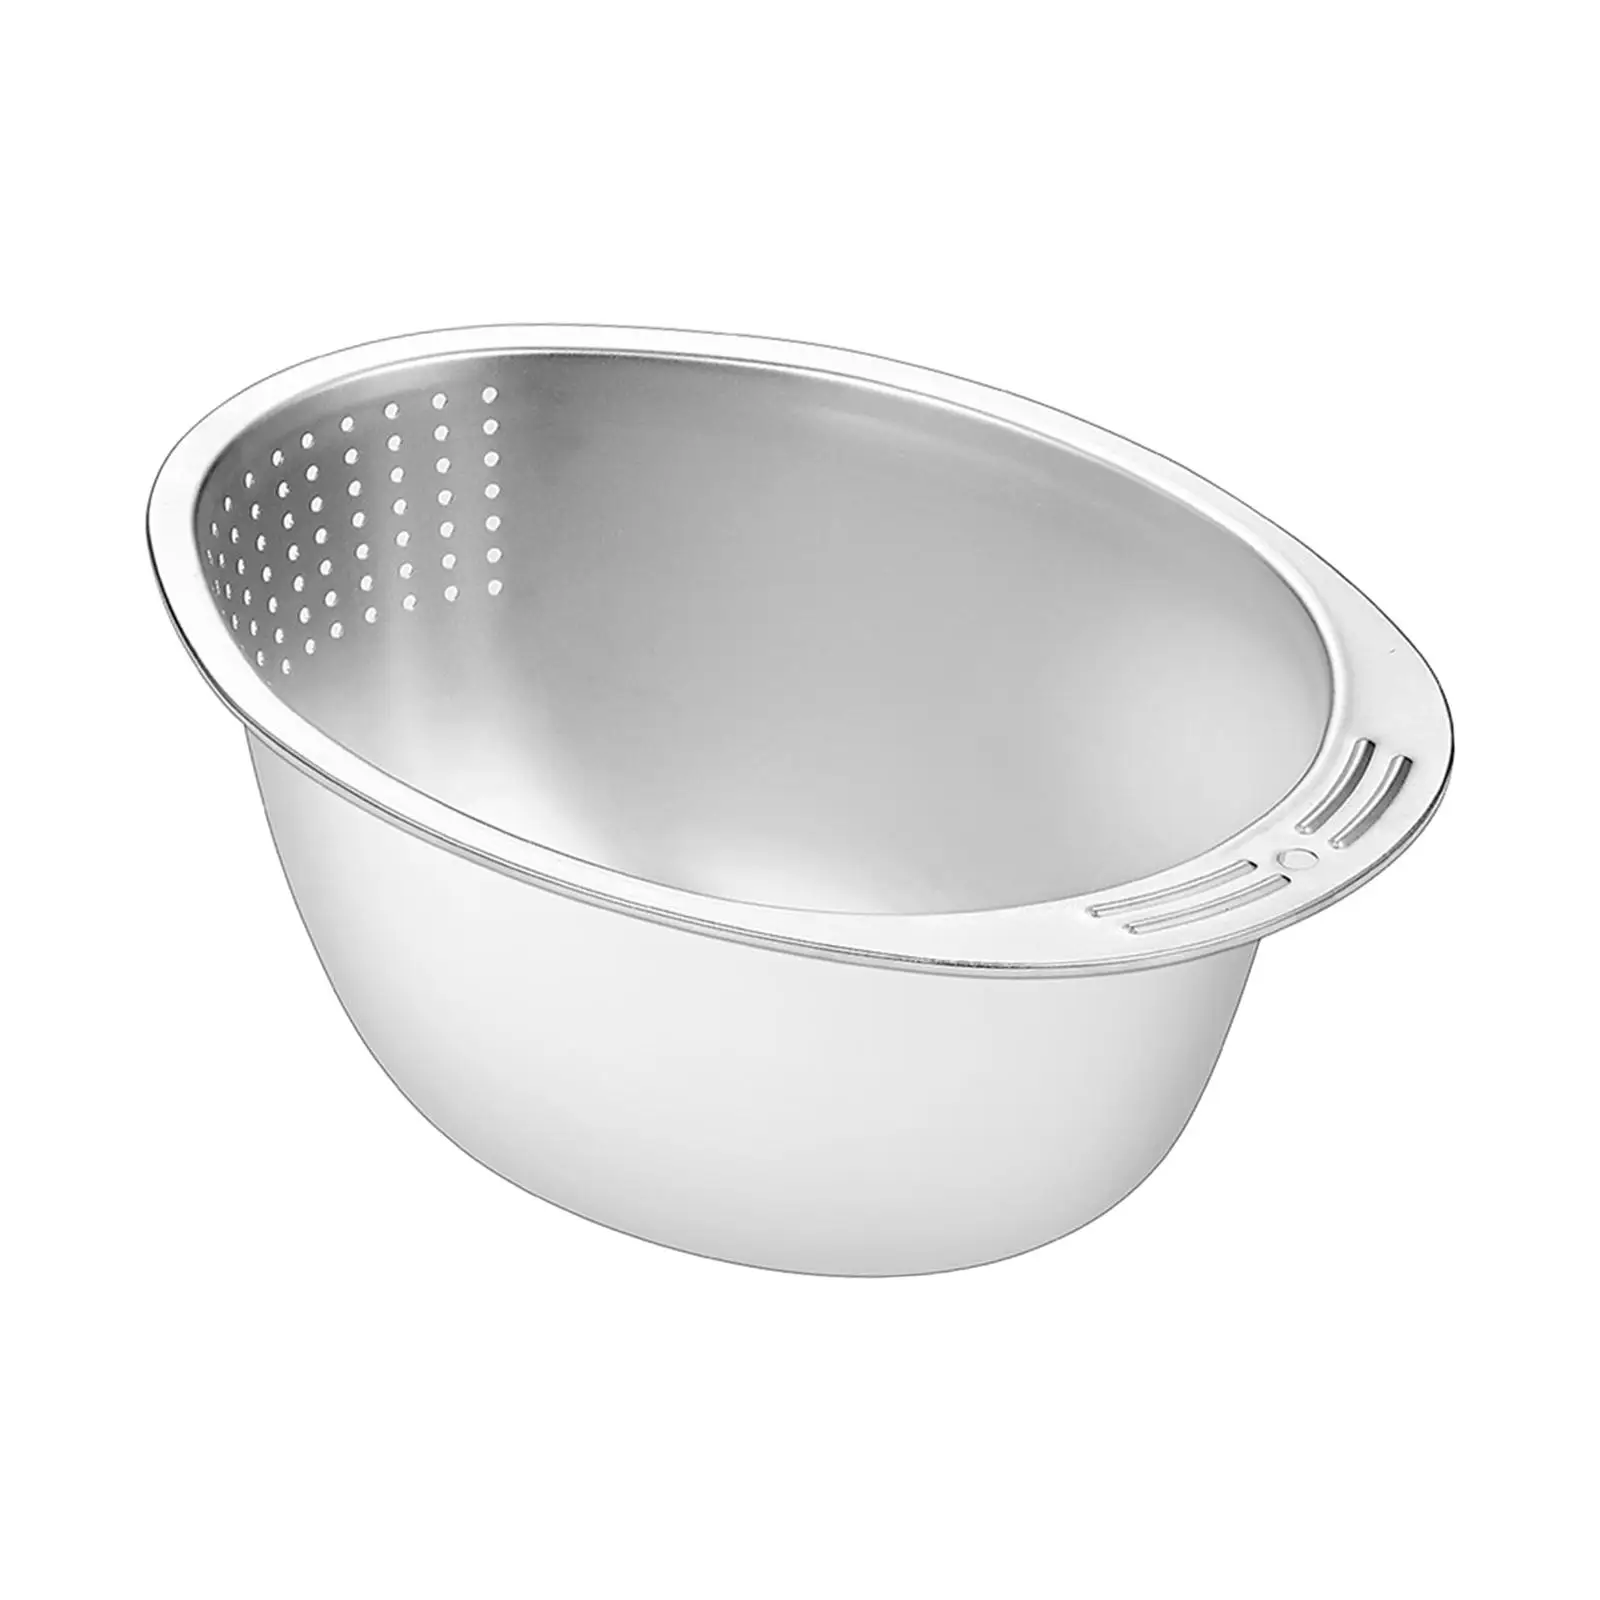 Household Grain Washer Strainer Kitchen Gadgets Multipurpose Rice Washing Filter Strainer Basket for Rice Beans Grapes Peas